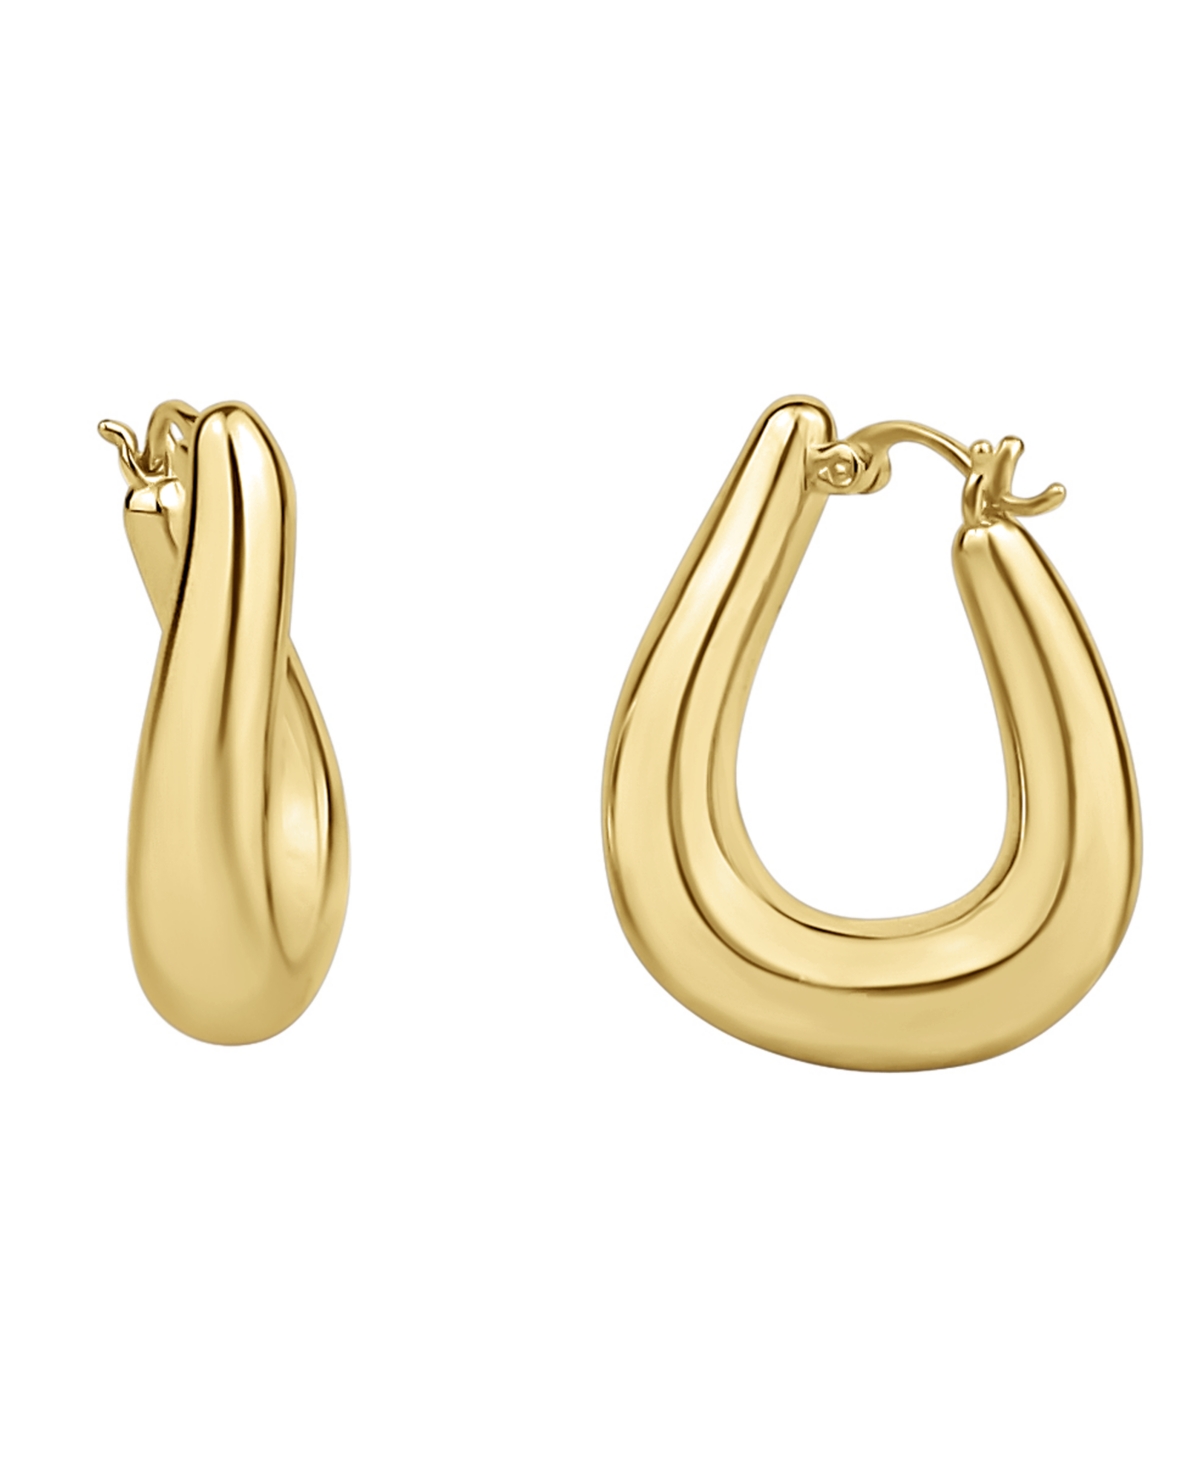 Women's Curved Hoop Earring - Gold Plated